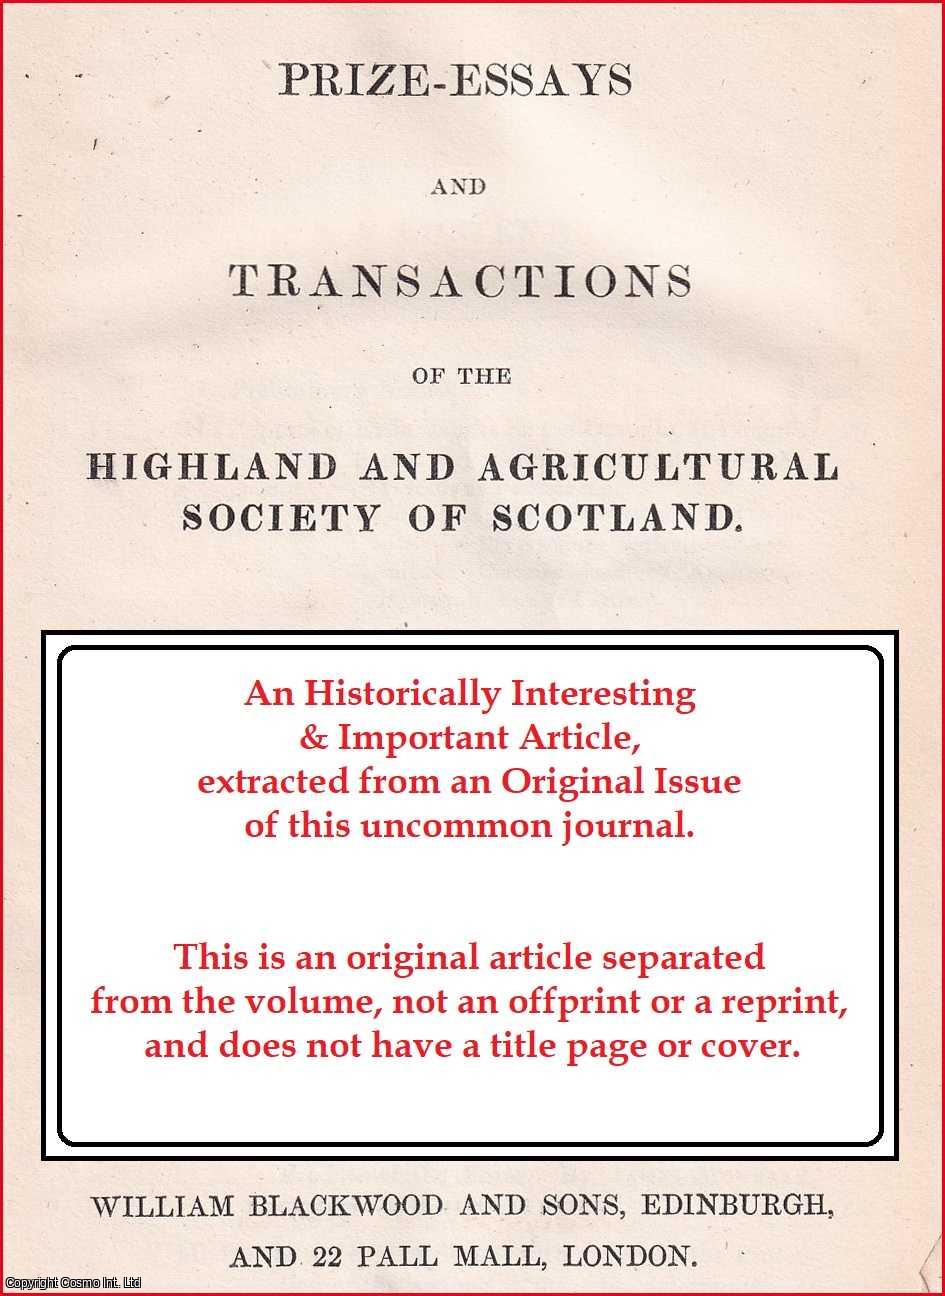 Mr. George Smith, Architect, Edinburgh. - The Construction of Cottages, Suited for the Dwellings of the Labouring Classes, & Adapted to the Climate of Scotland. An uncommon original article from the Prize Essays and Transactions of the Highland Society of Scotland, 1835.